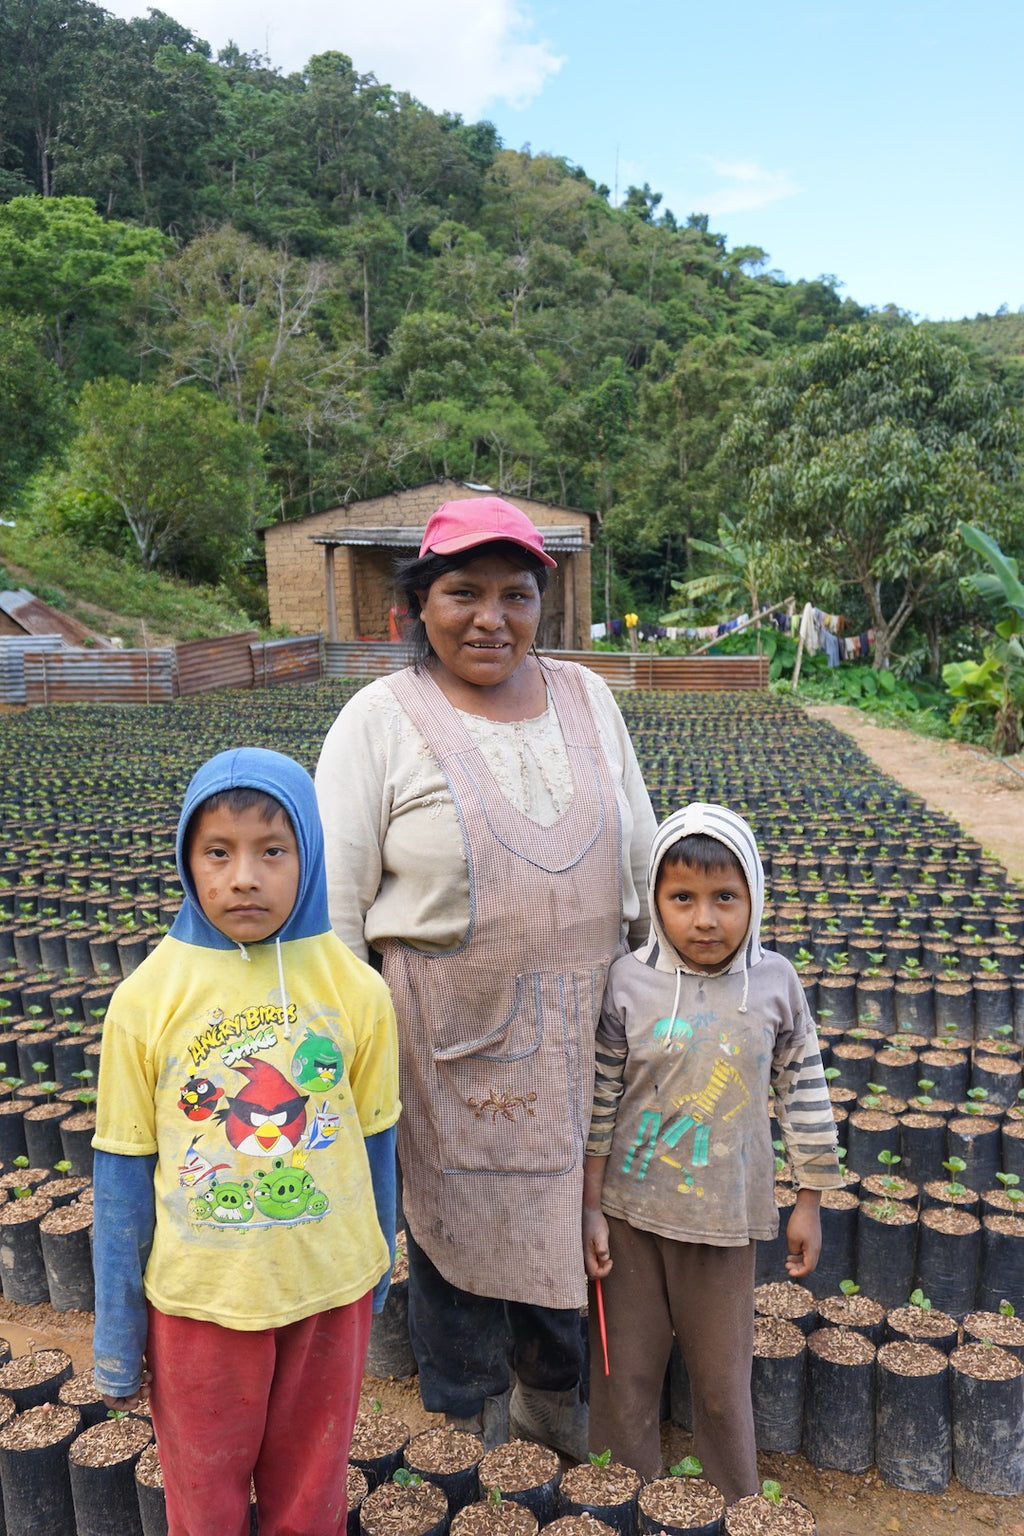 Daisy Paye Mamani and her 2 sons photographed at Volcán del Tigre